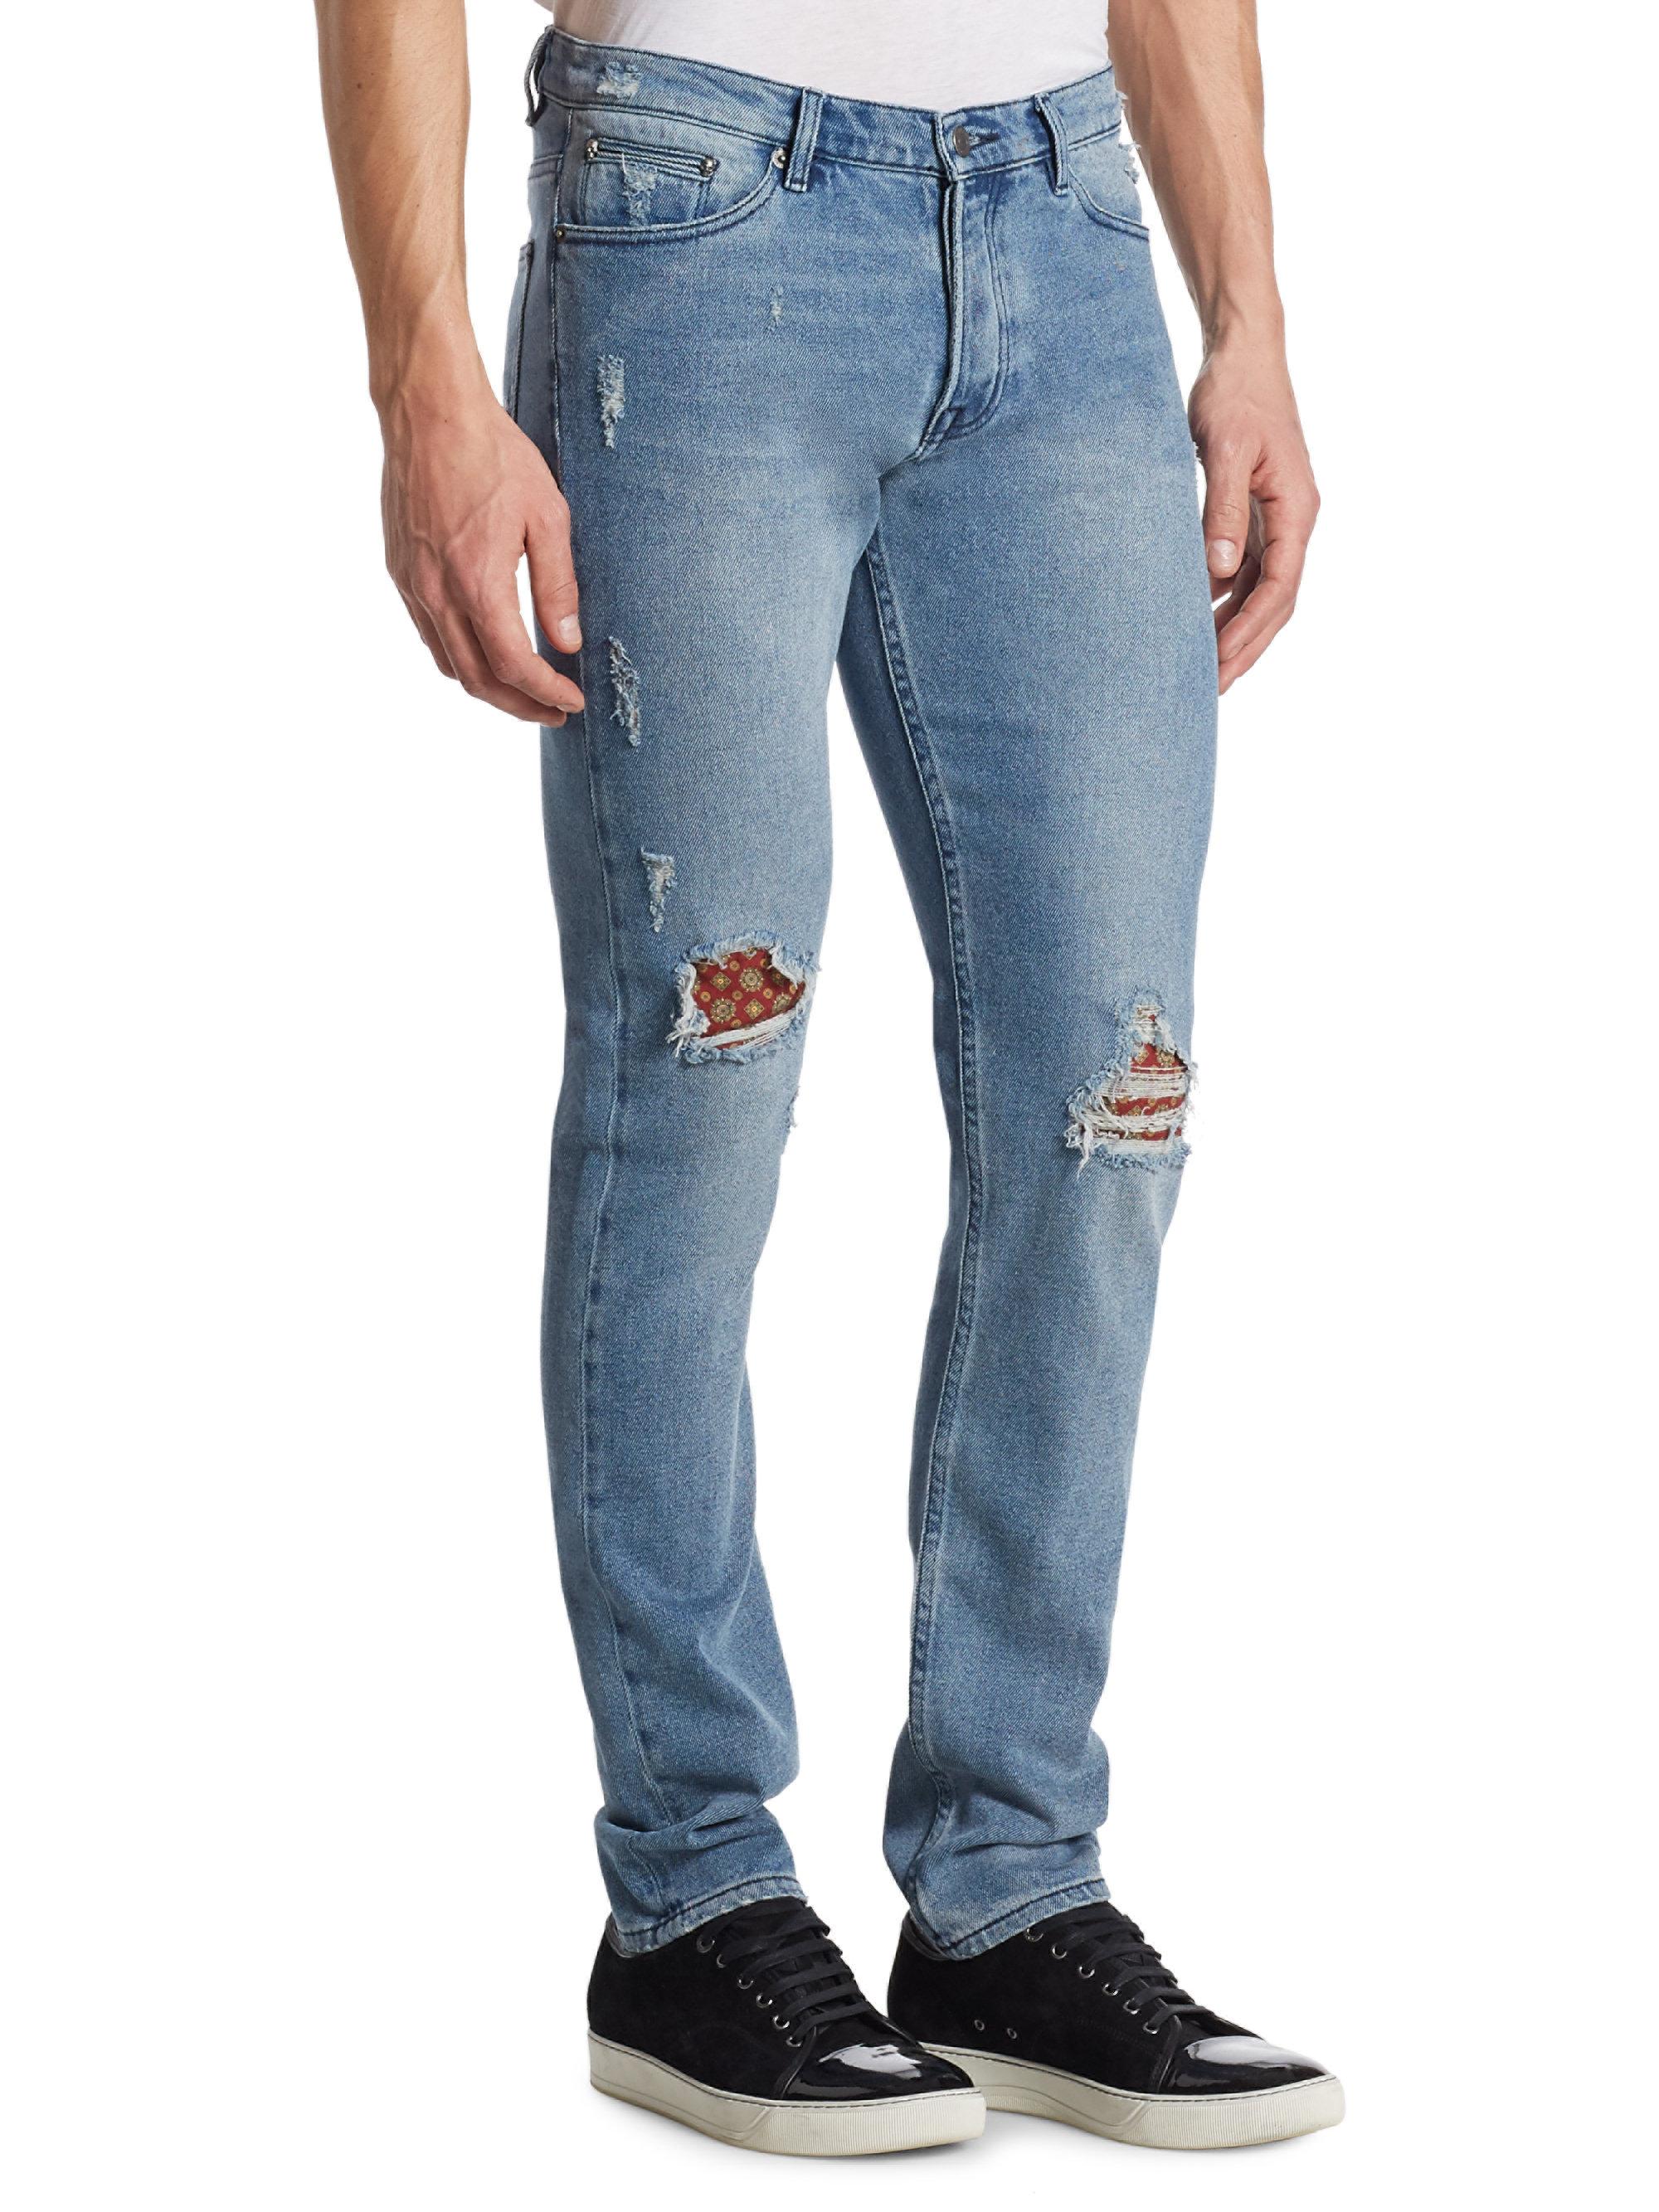 Lyst - The Kooples Distressed Slim-fit Jeans in Blue for Men